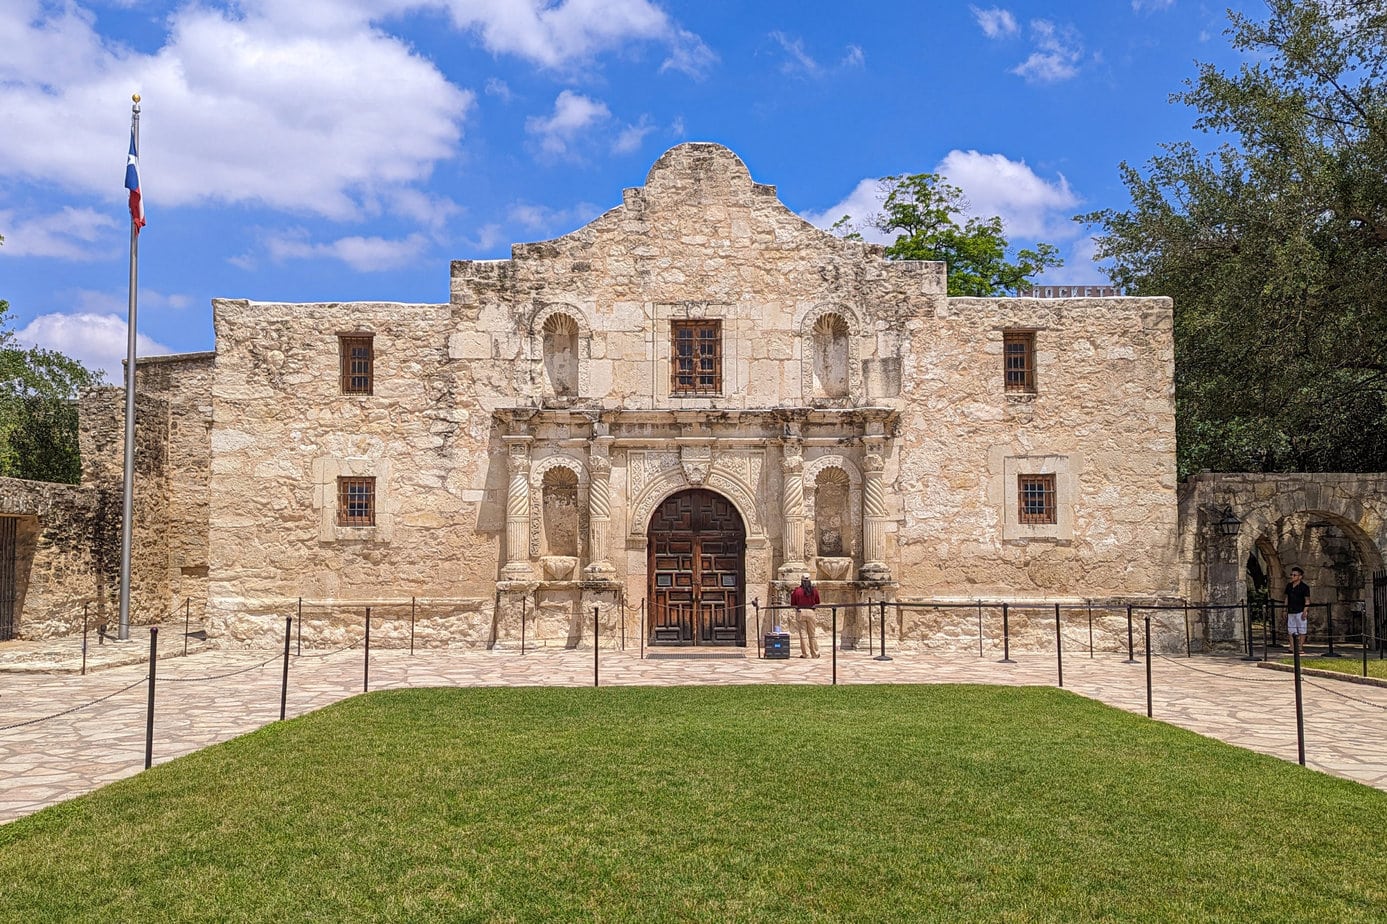 What To Do On A Day Journey In San Antonio Texas Rutasepicas